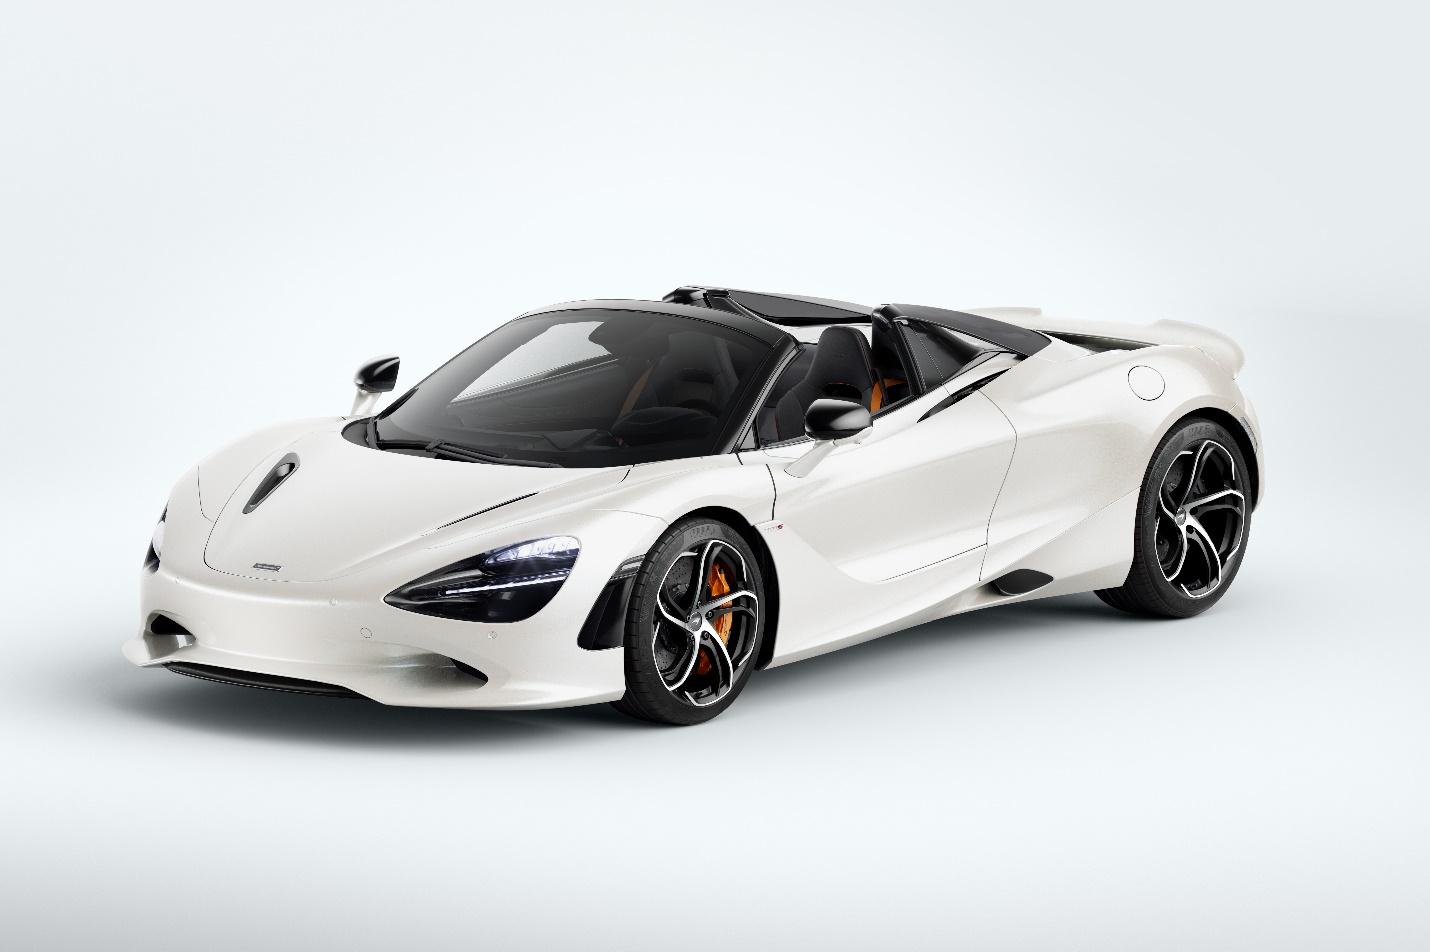 A white sports car with black windows

Description automatically generated